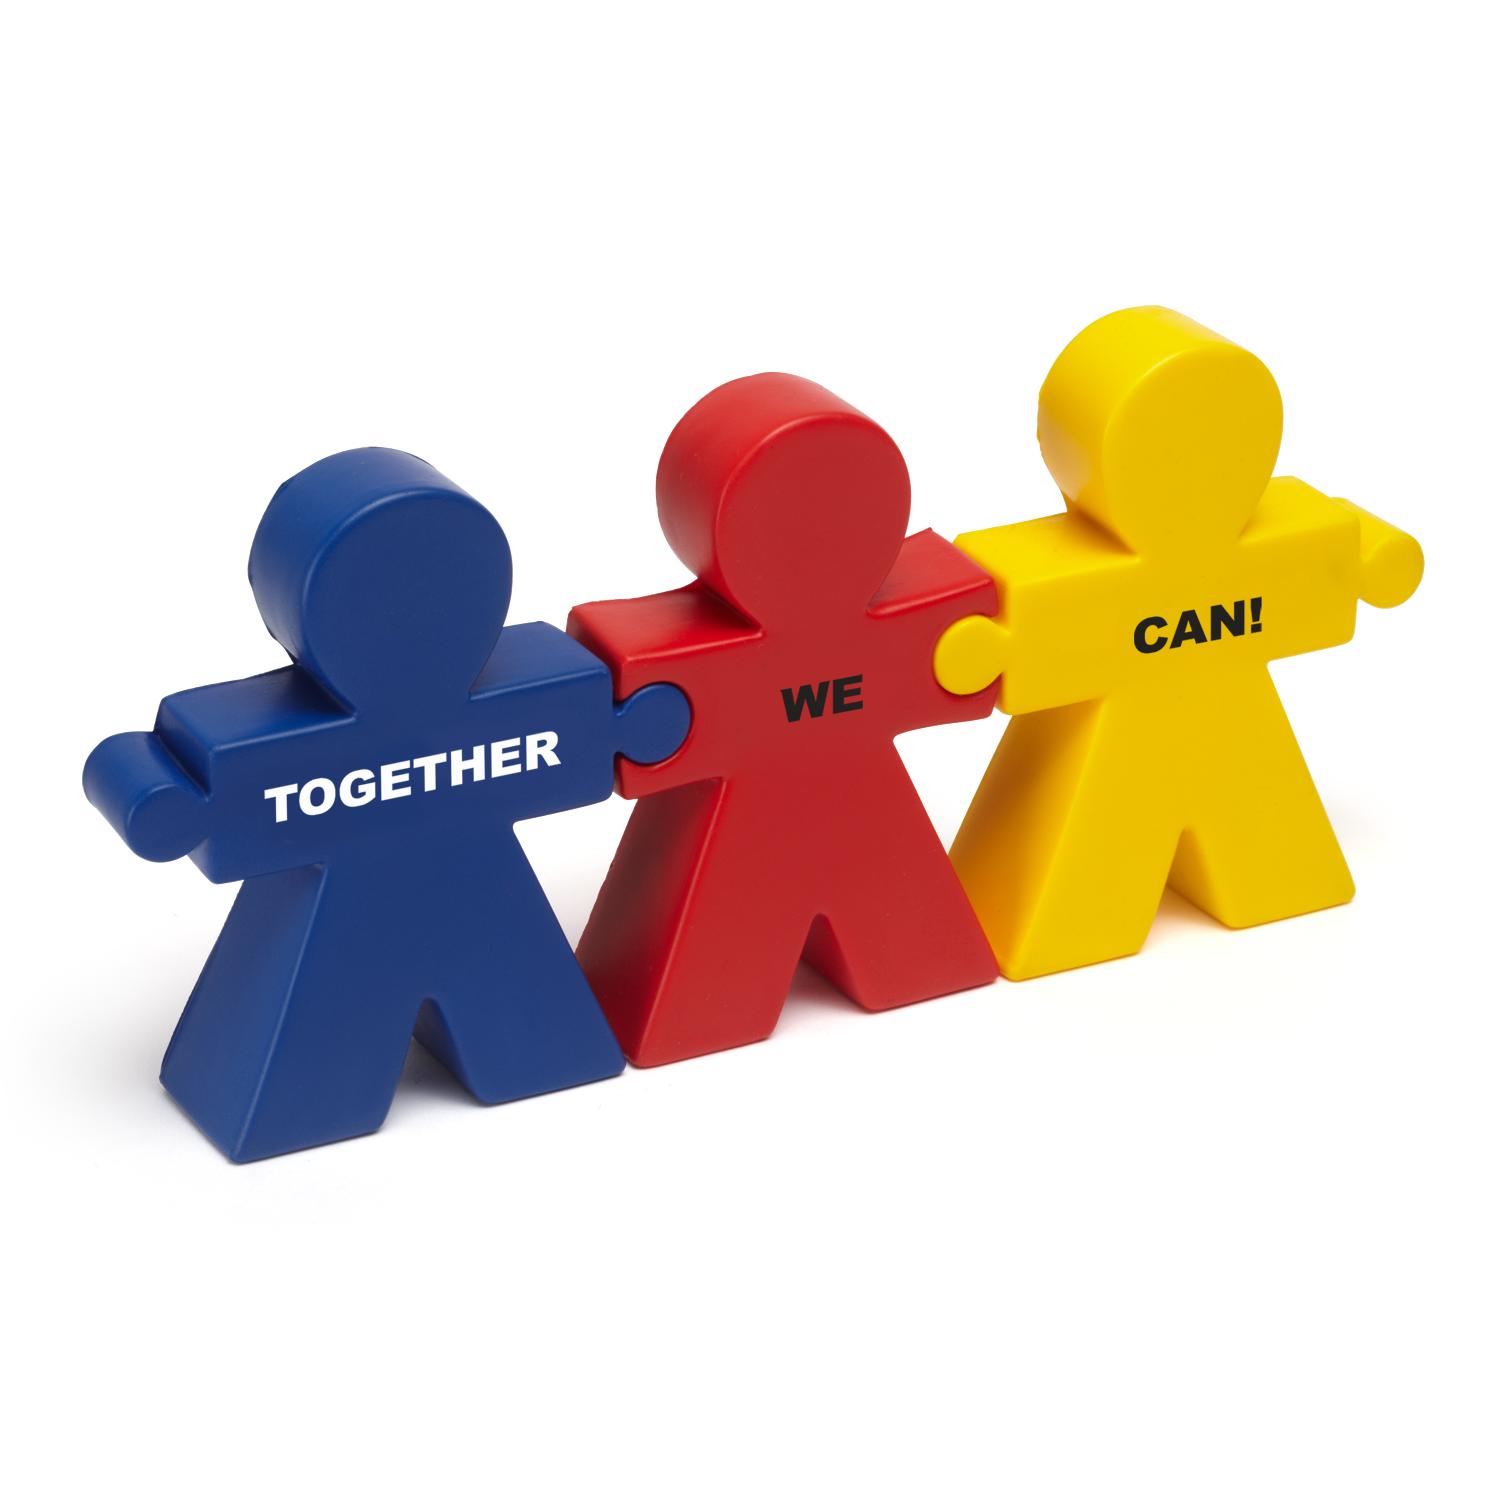 free clipart images for teamwork - photo #4